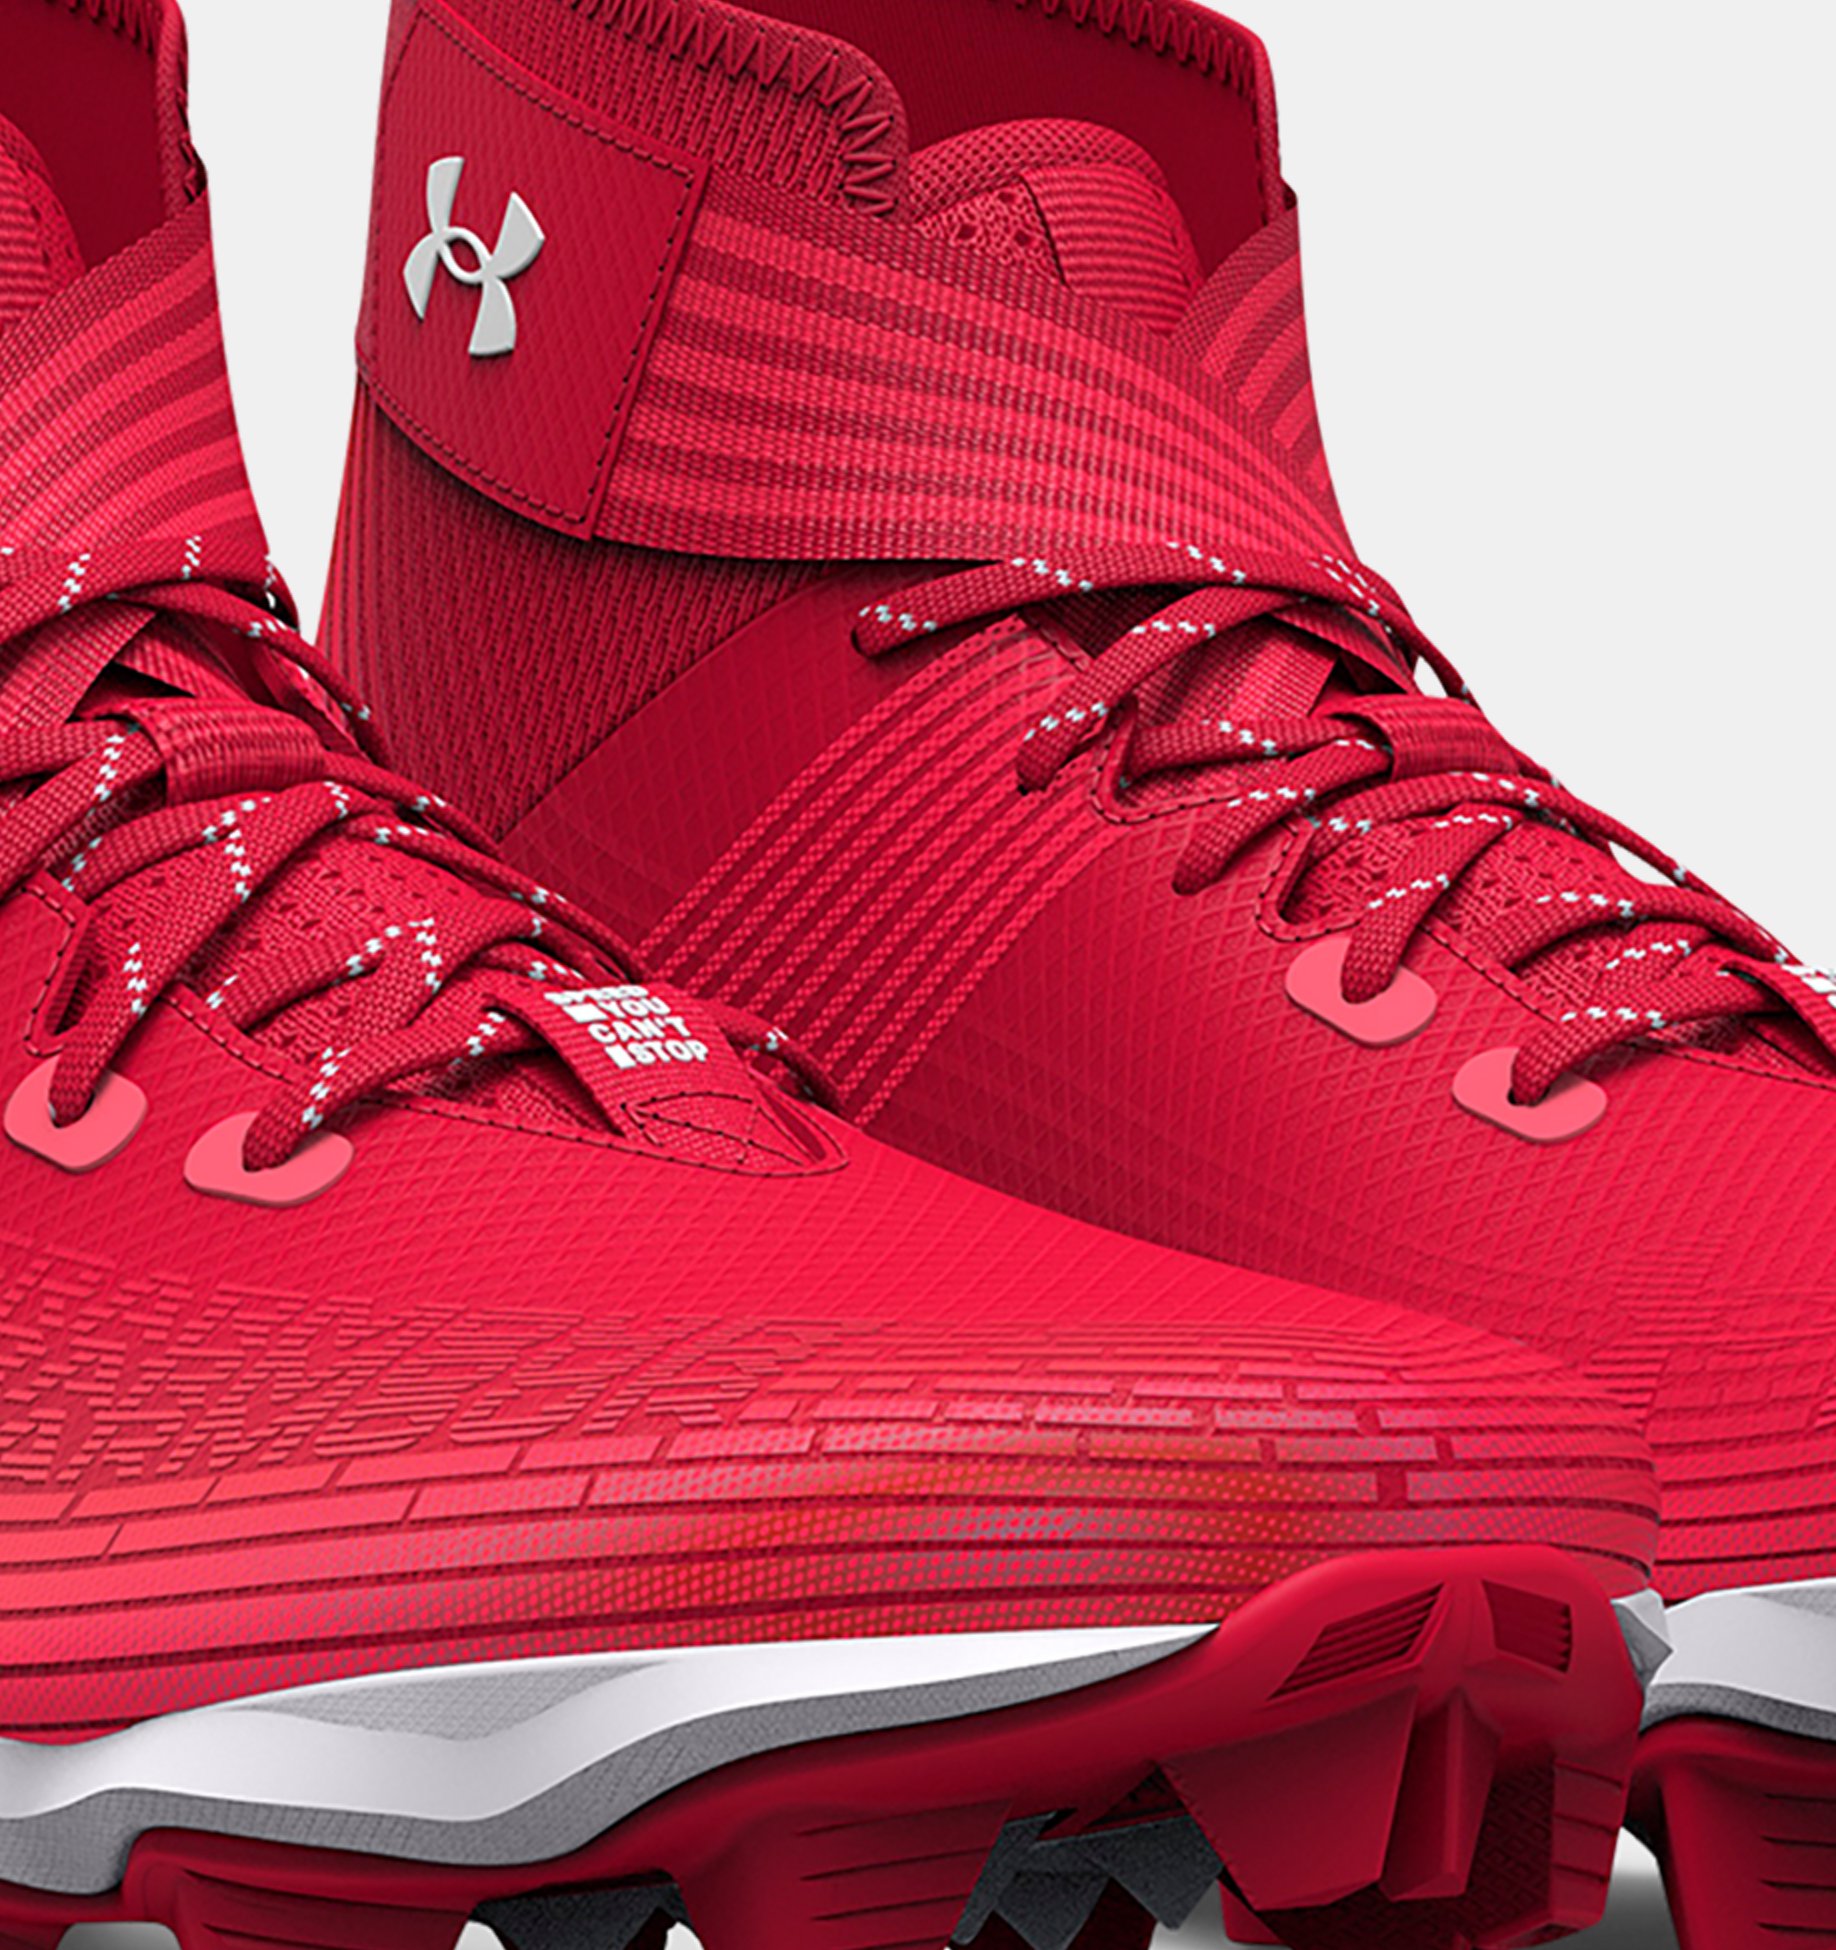 Franchise Football Cleats | Under Armour